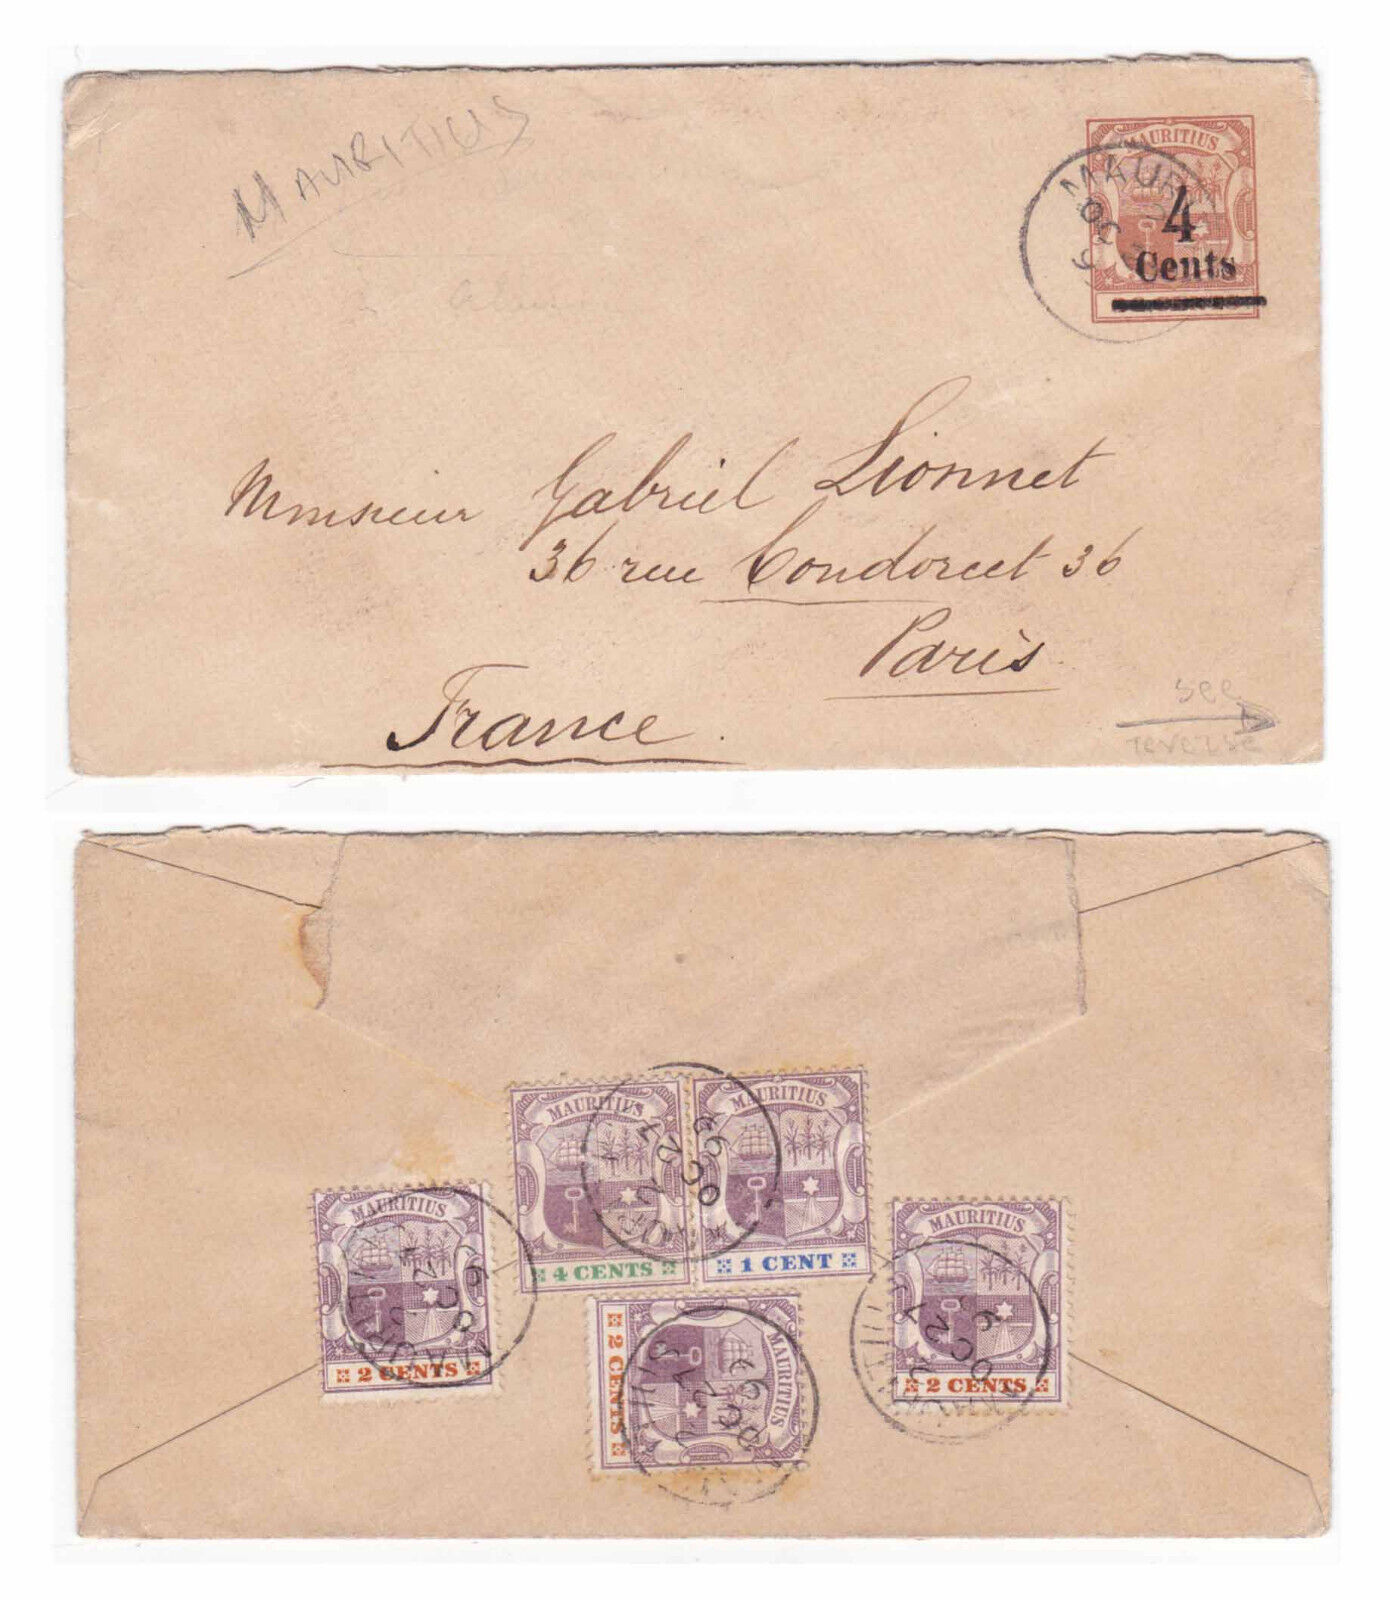 MAURITIUS..GREAT BRITAIGN..1899 A MULTIFRANKED COVER  SHIPPED TO PARIS.